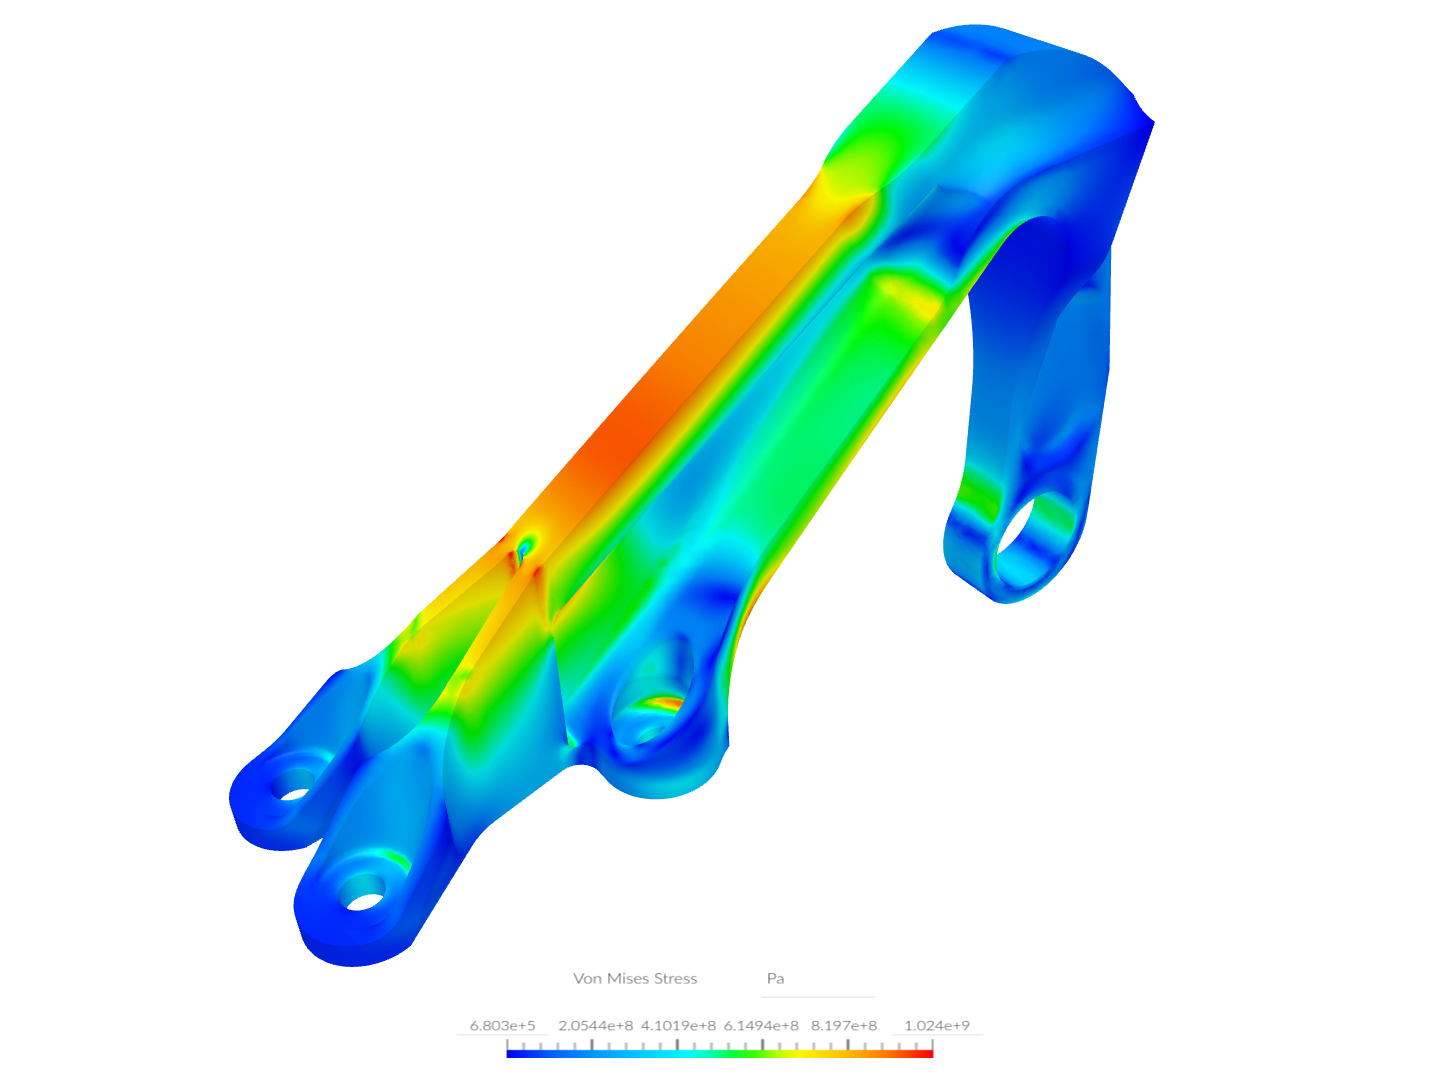 Coursera Guided Project Copy - FEM Linear, Nonlinear Analysis & Post-Processing Training - Bearing Bracket Analysis image